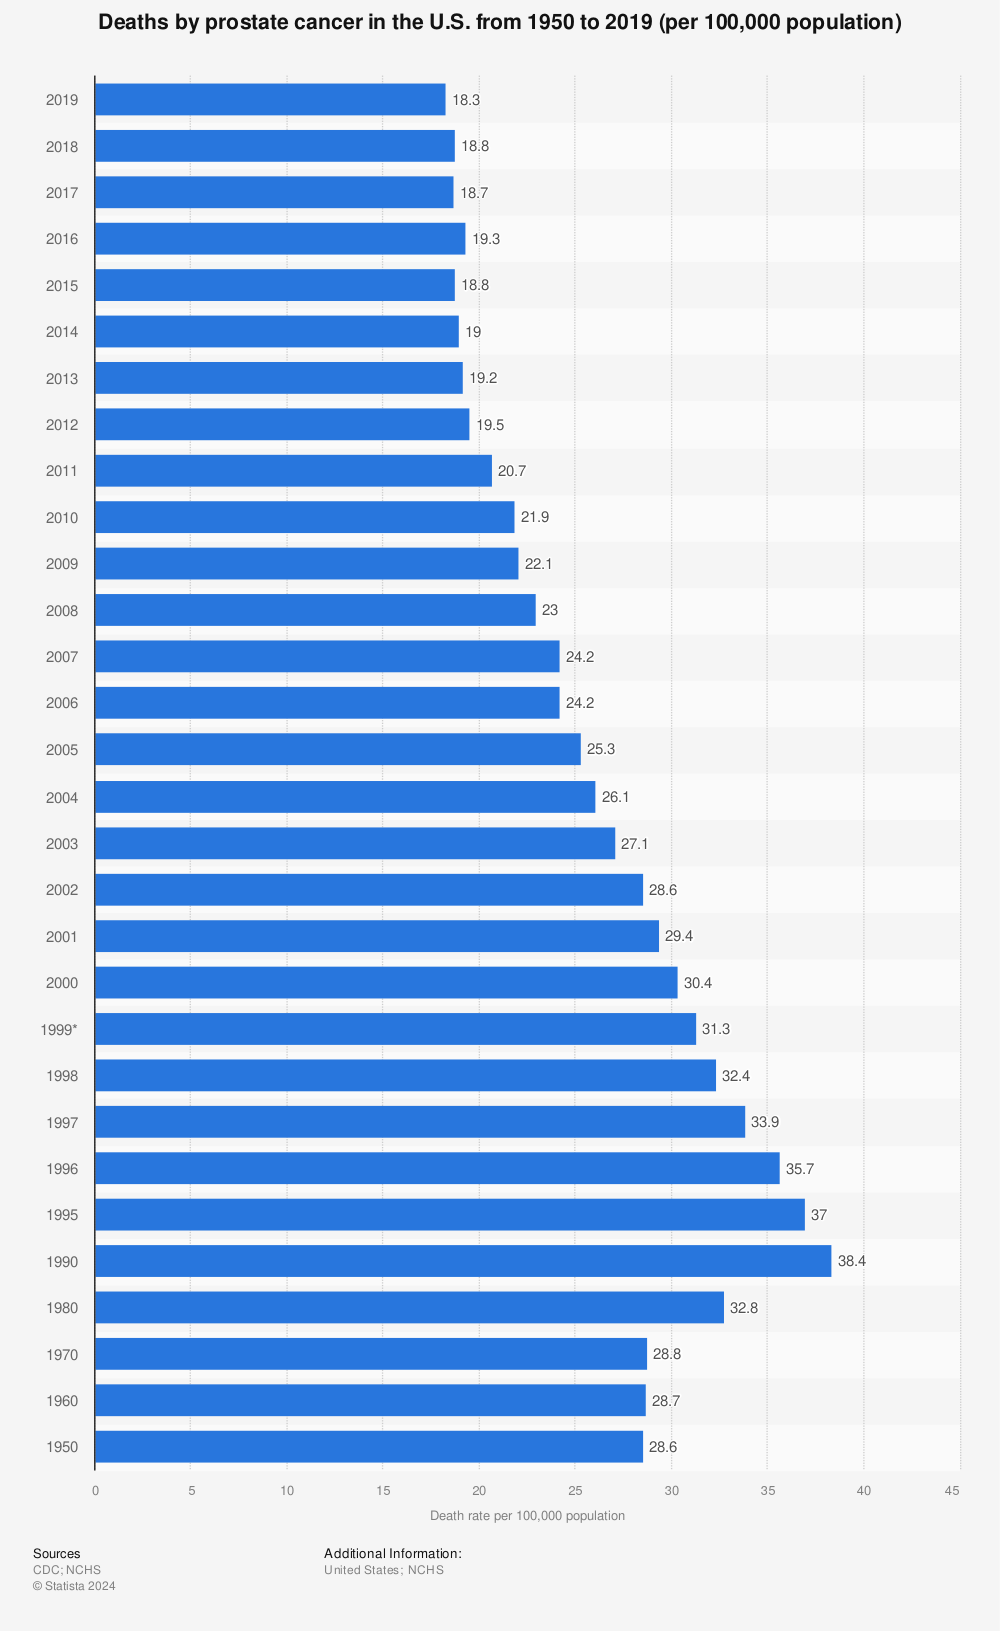 Statistic: Deaths by prostate cancer in the U.S. from 1950 to 2019 (per 100,000 population) | Statista